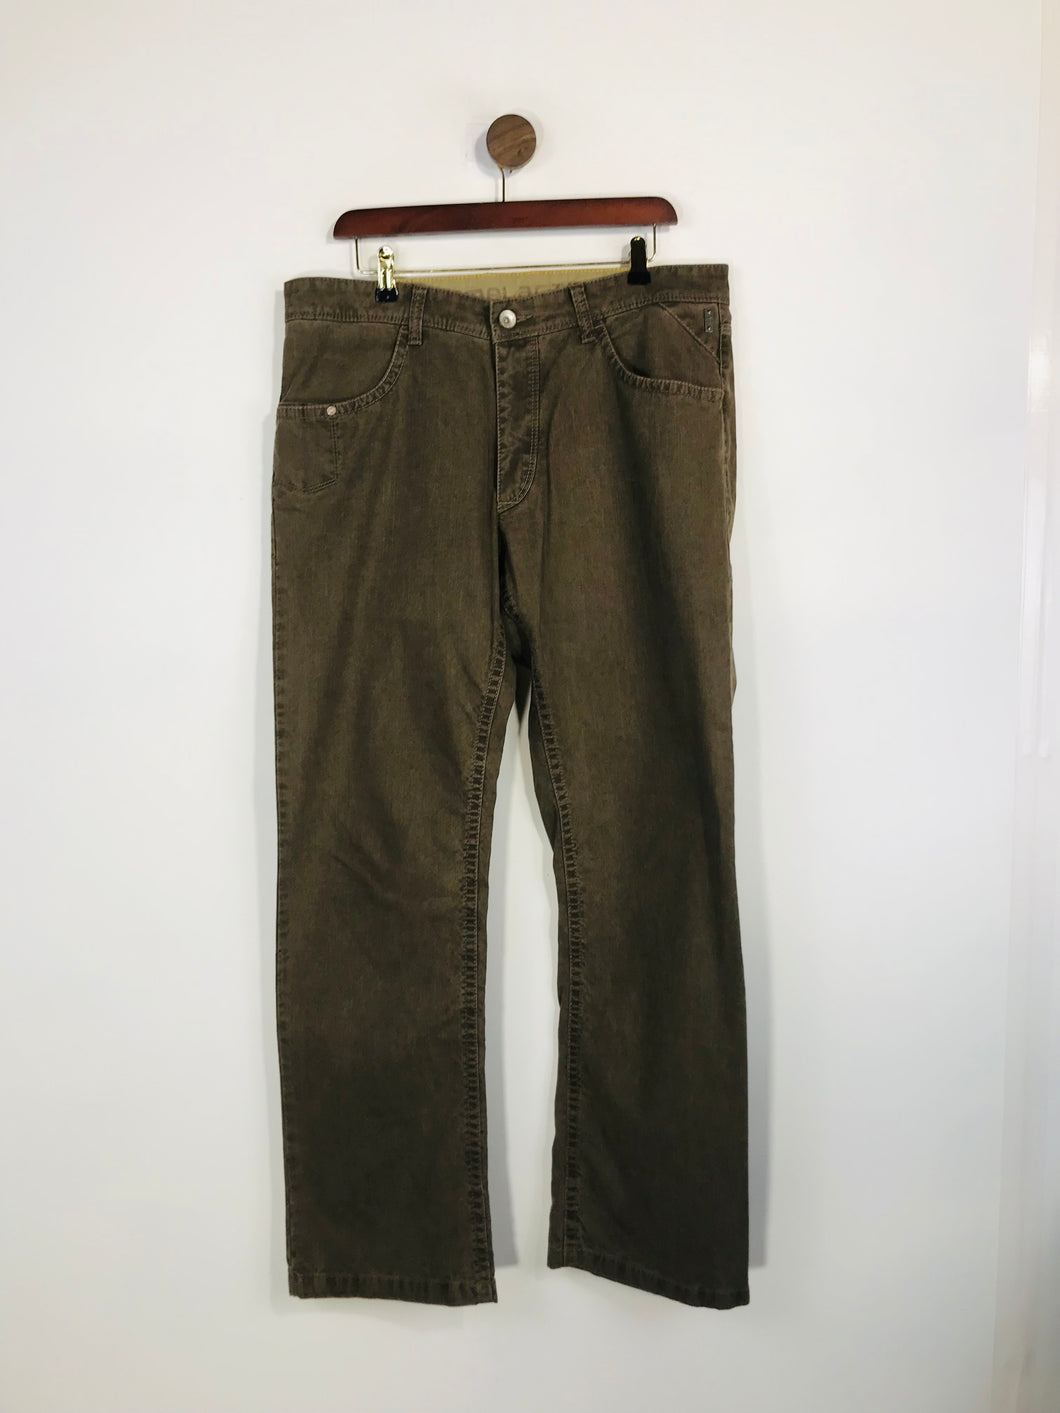 Camel Active Men's Straight Jeans | W36 L32 | Brown